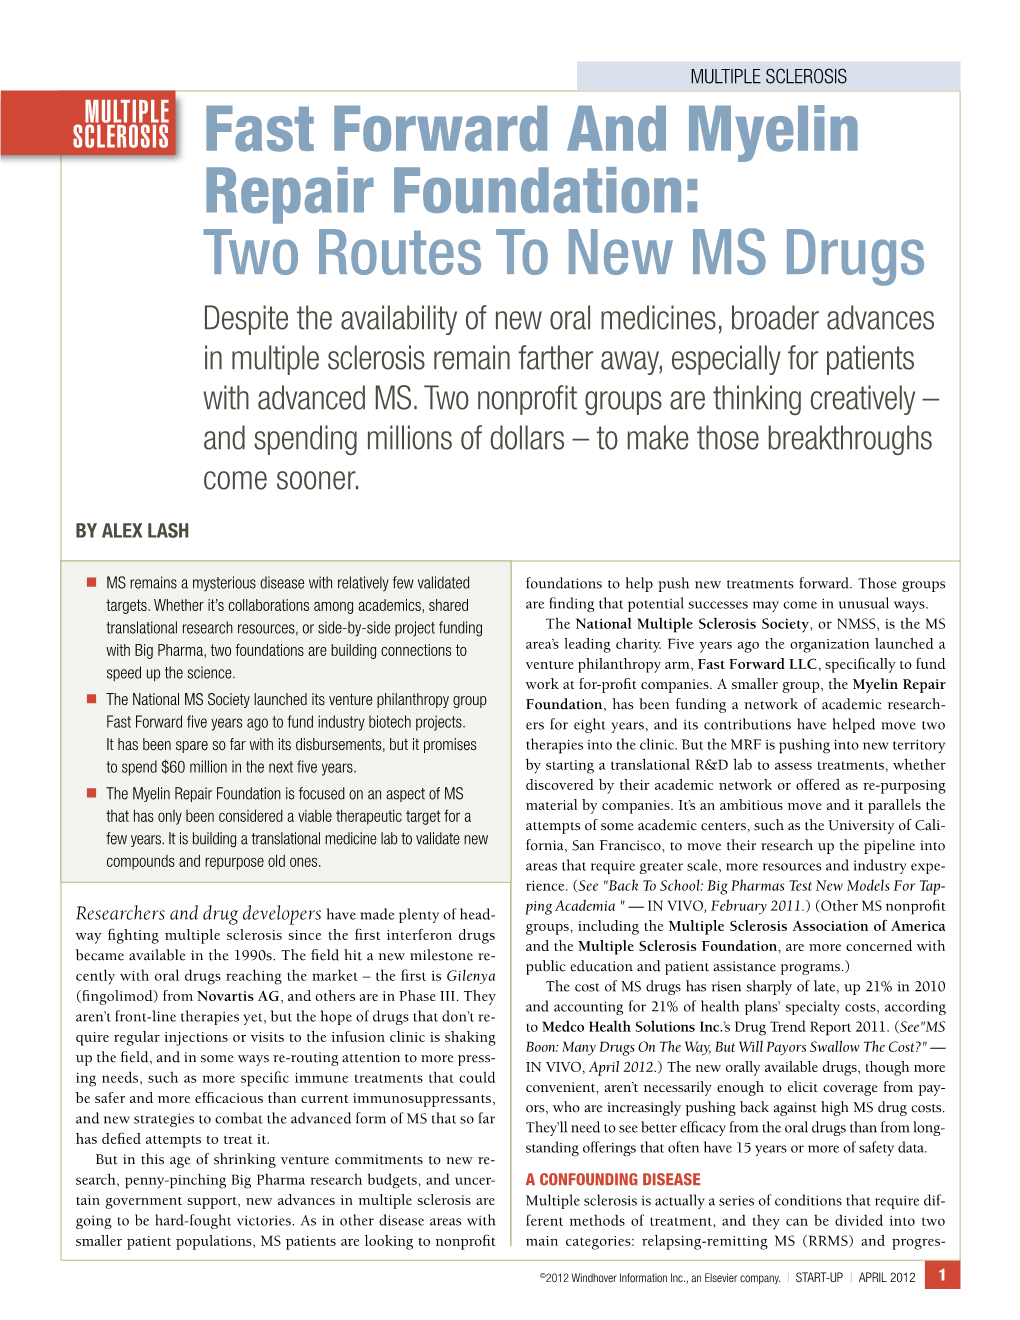 Repair Foundation: Two Routes to New MS Drugs